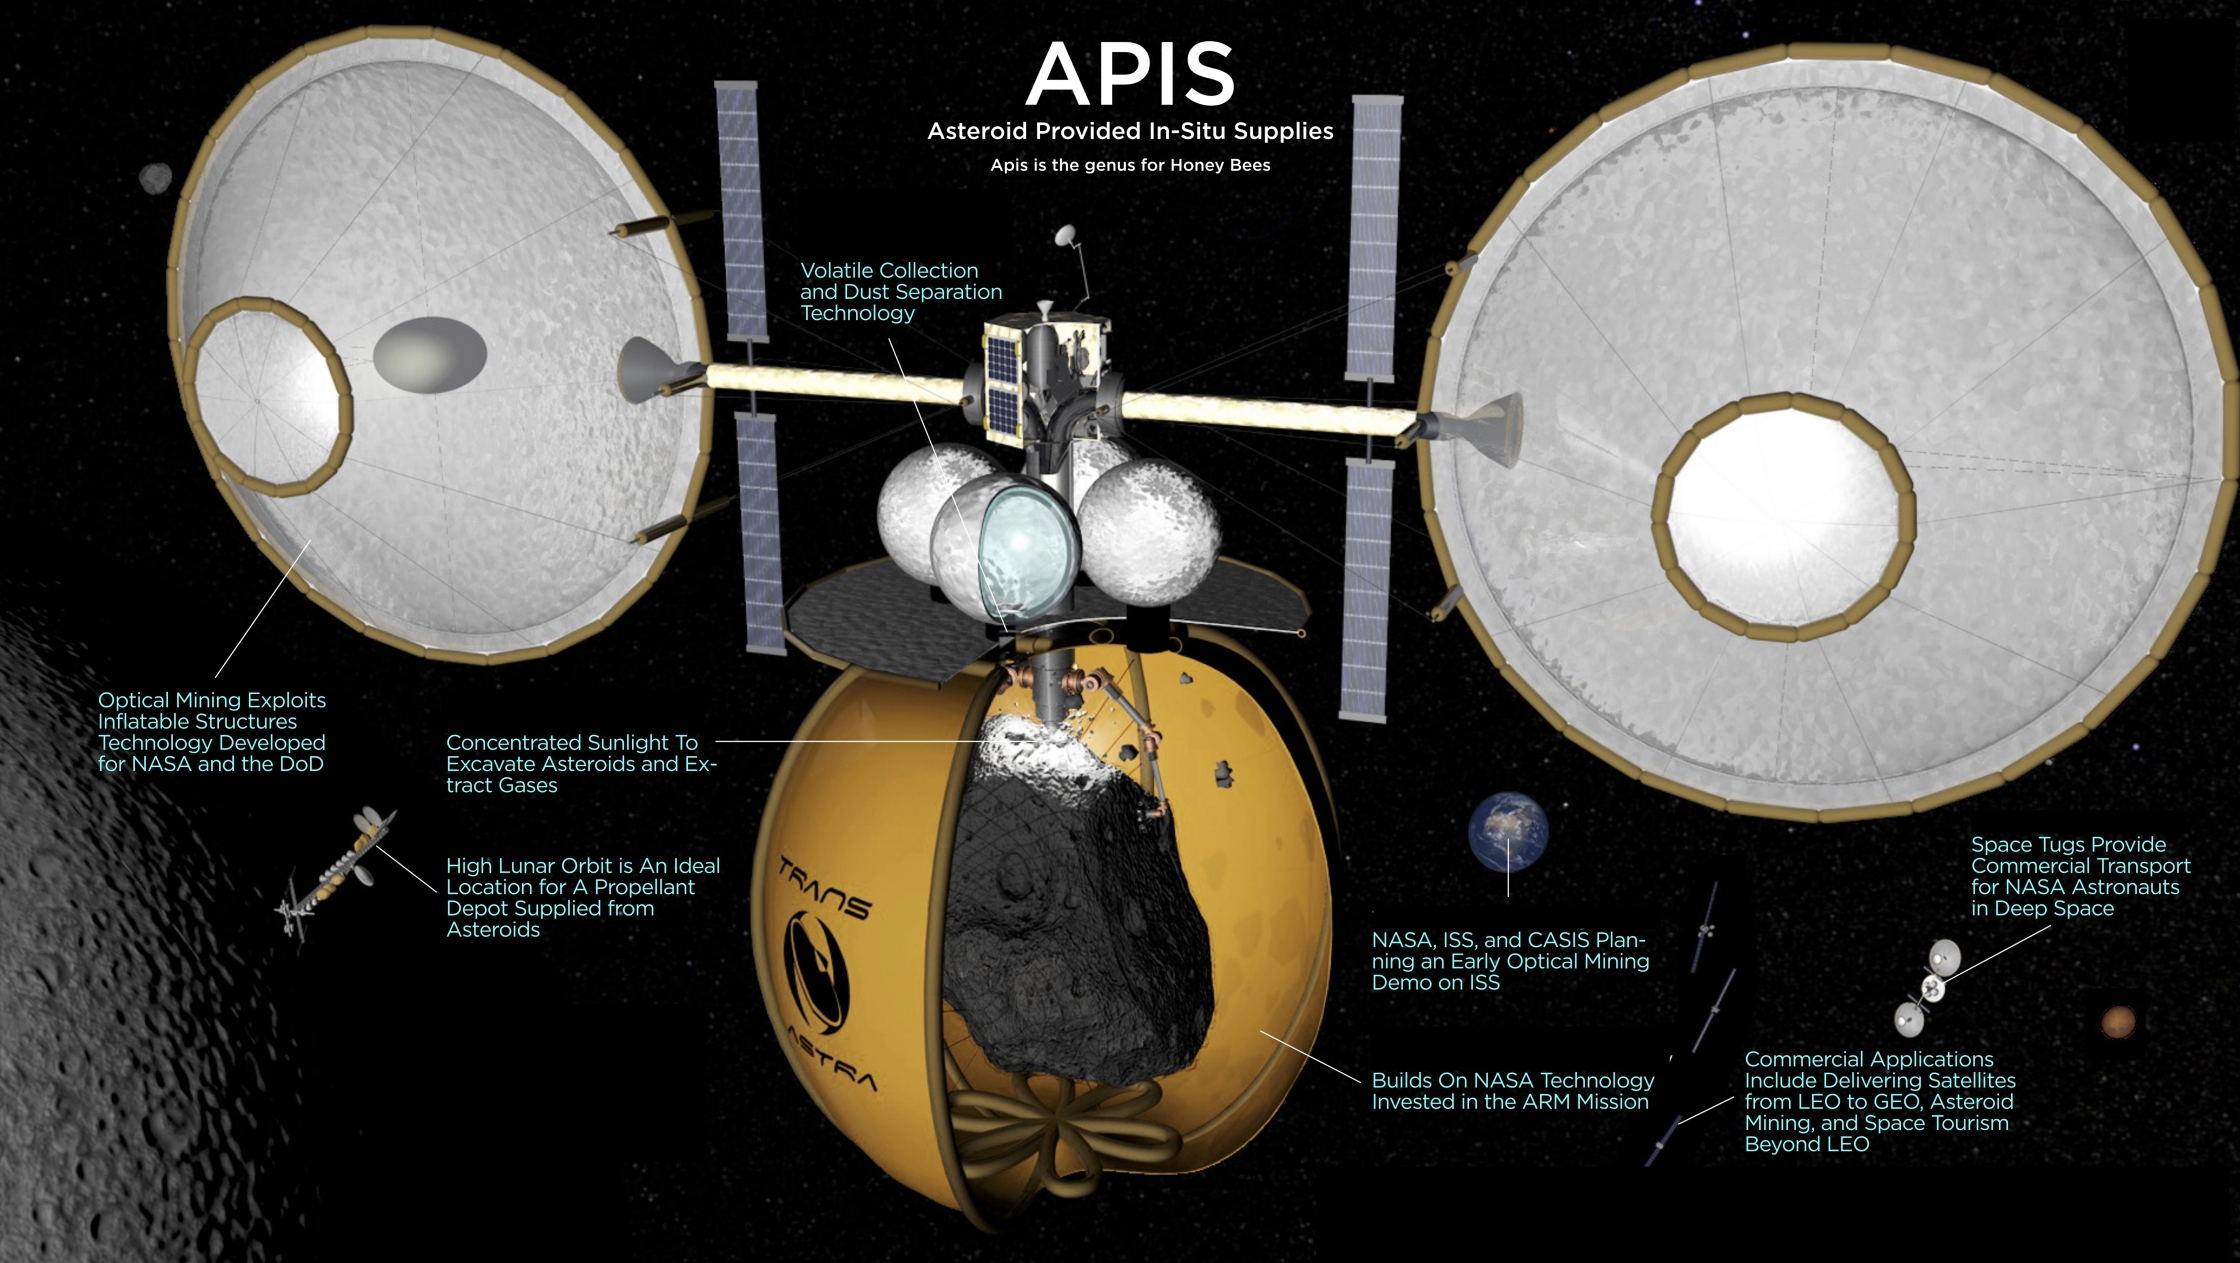 Asteroid-provided in-situ supplies: